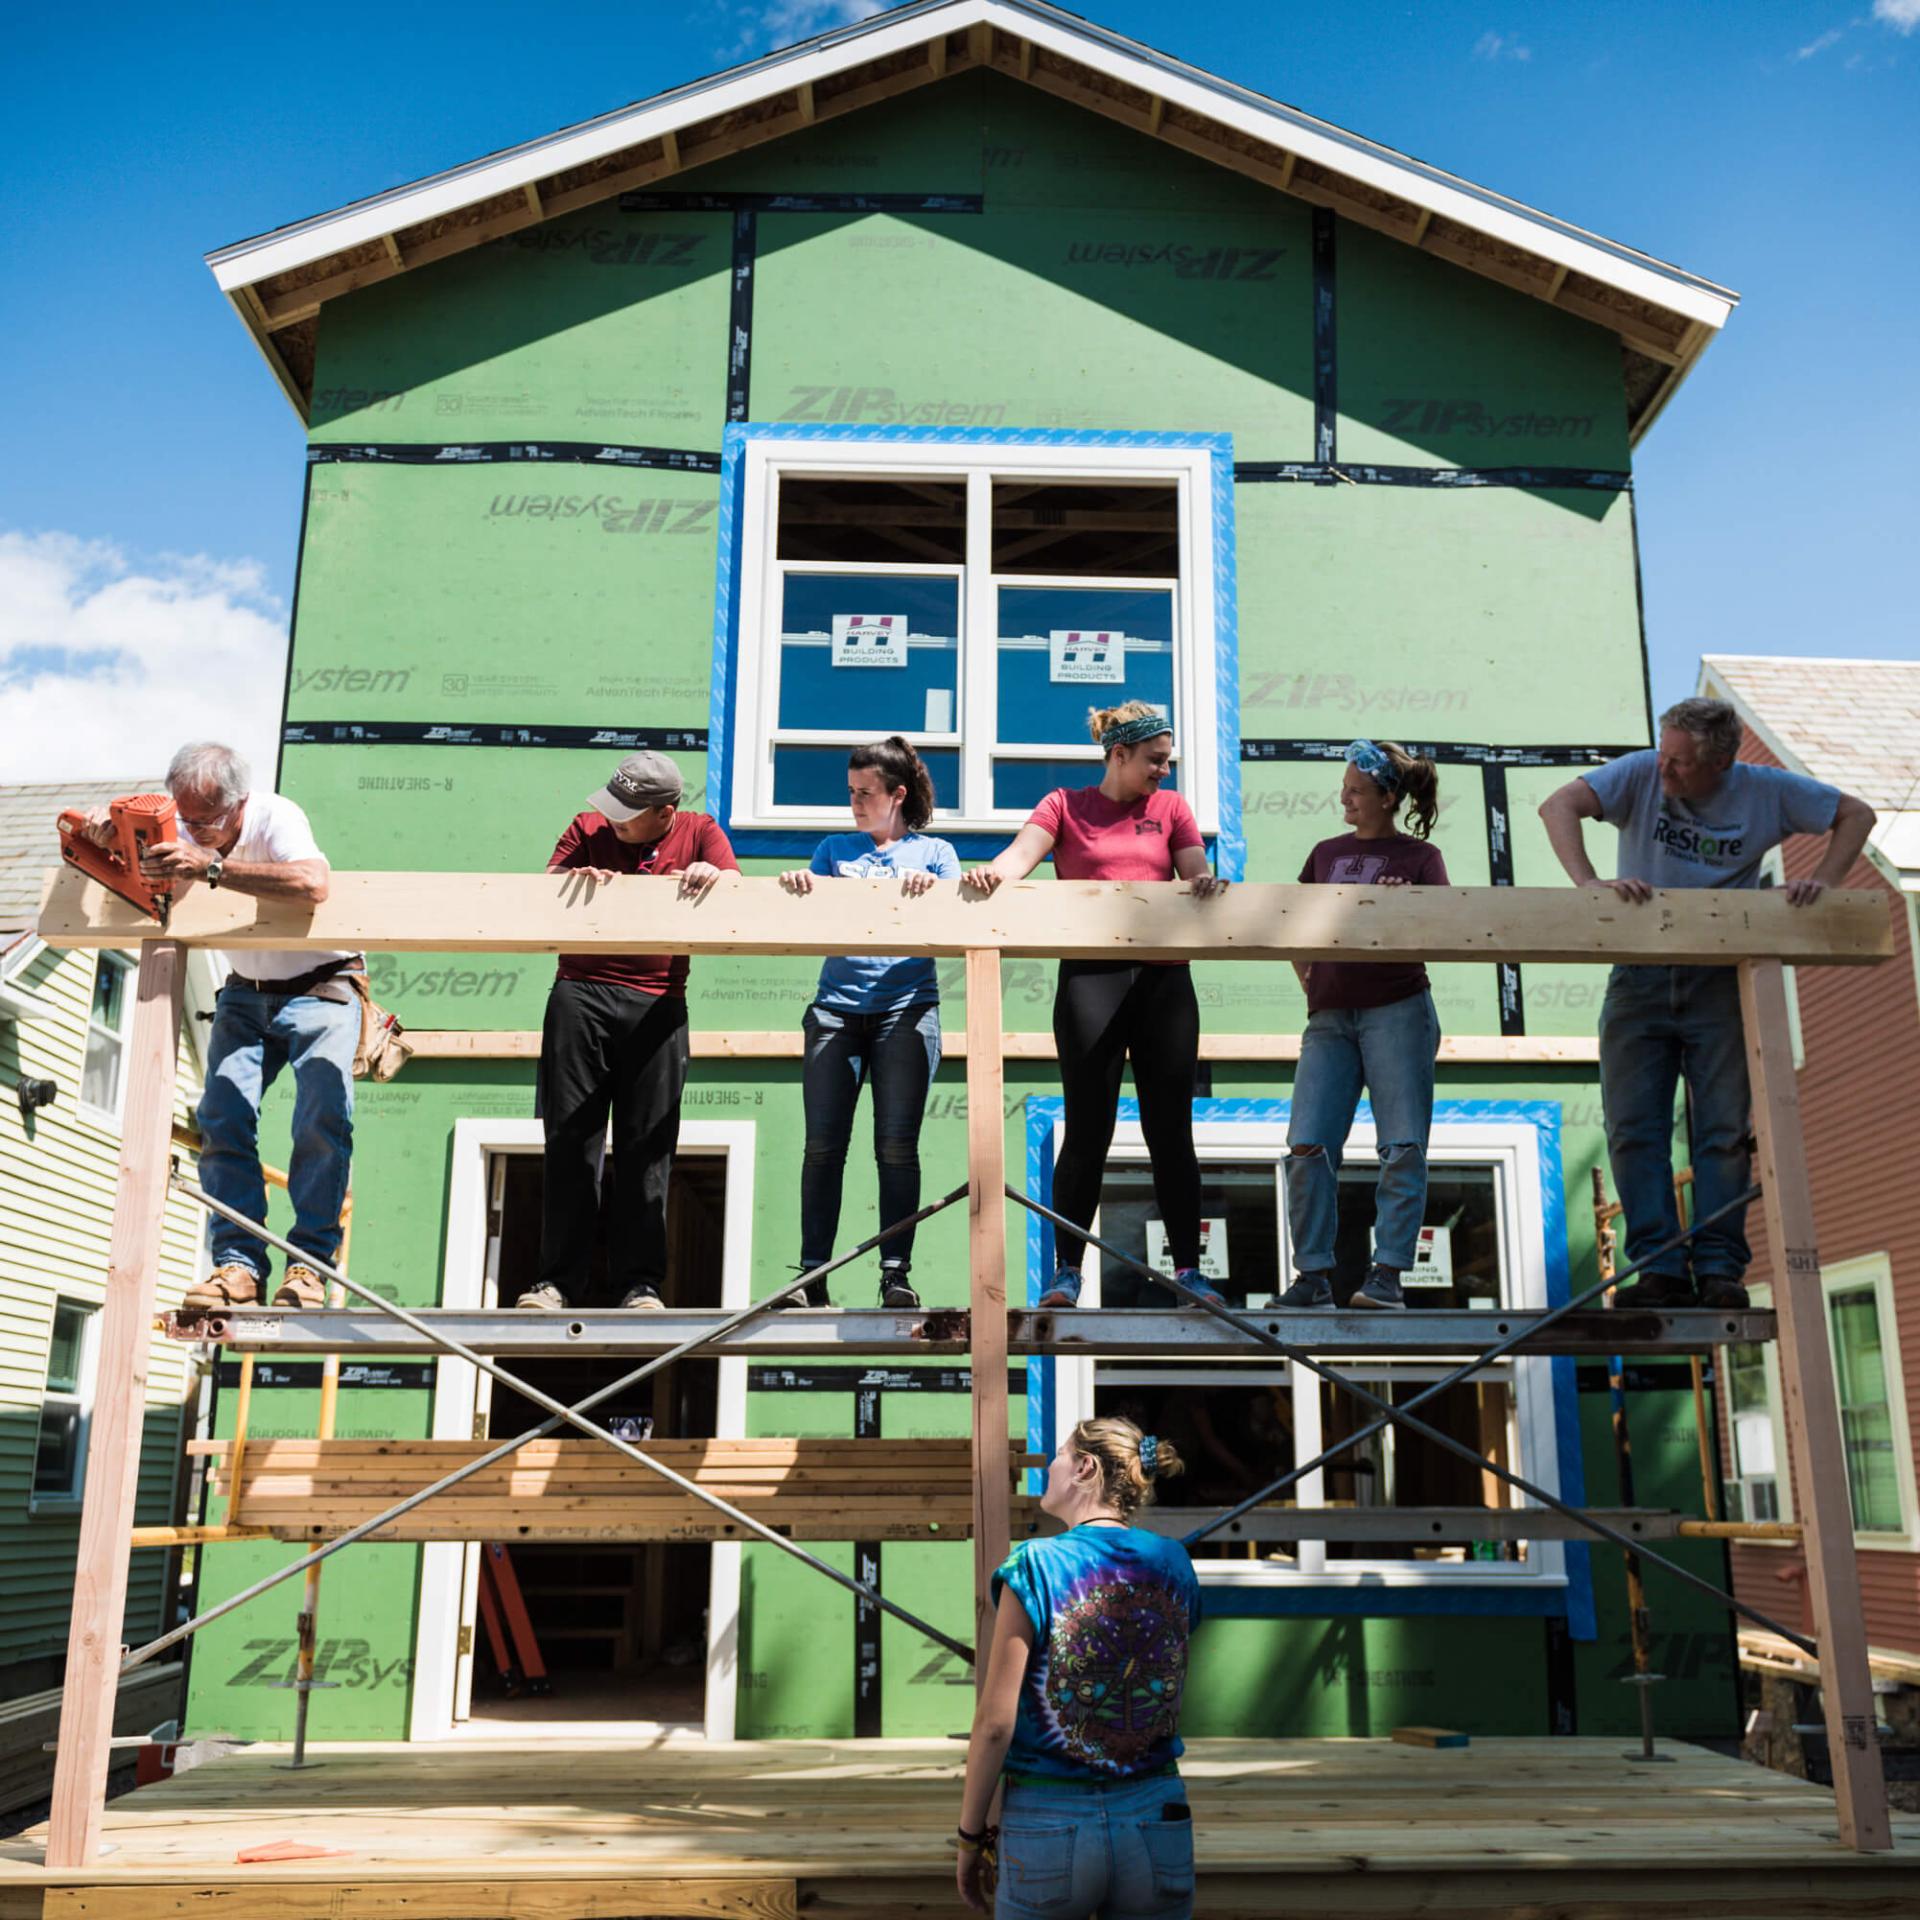 A group of participants work together to balance a beam in front of a large Habitat for Humanity build